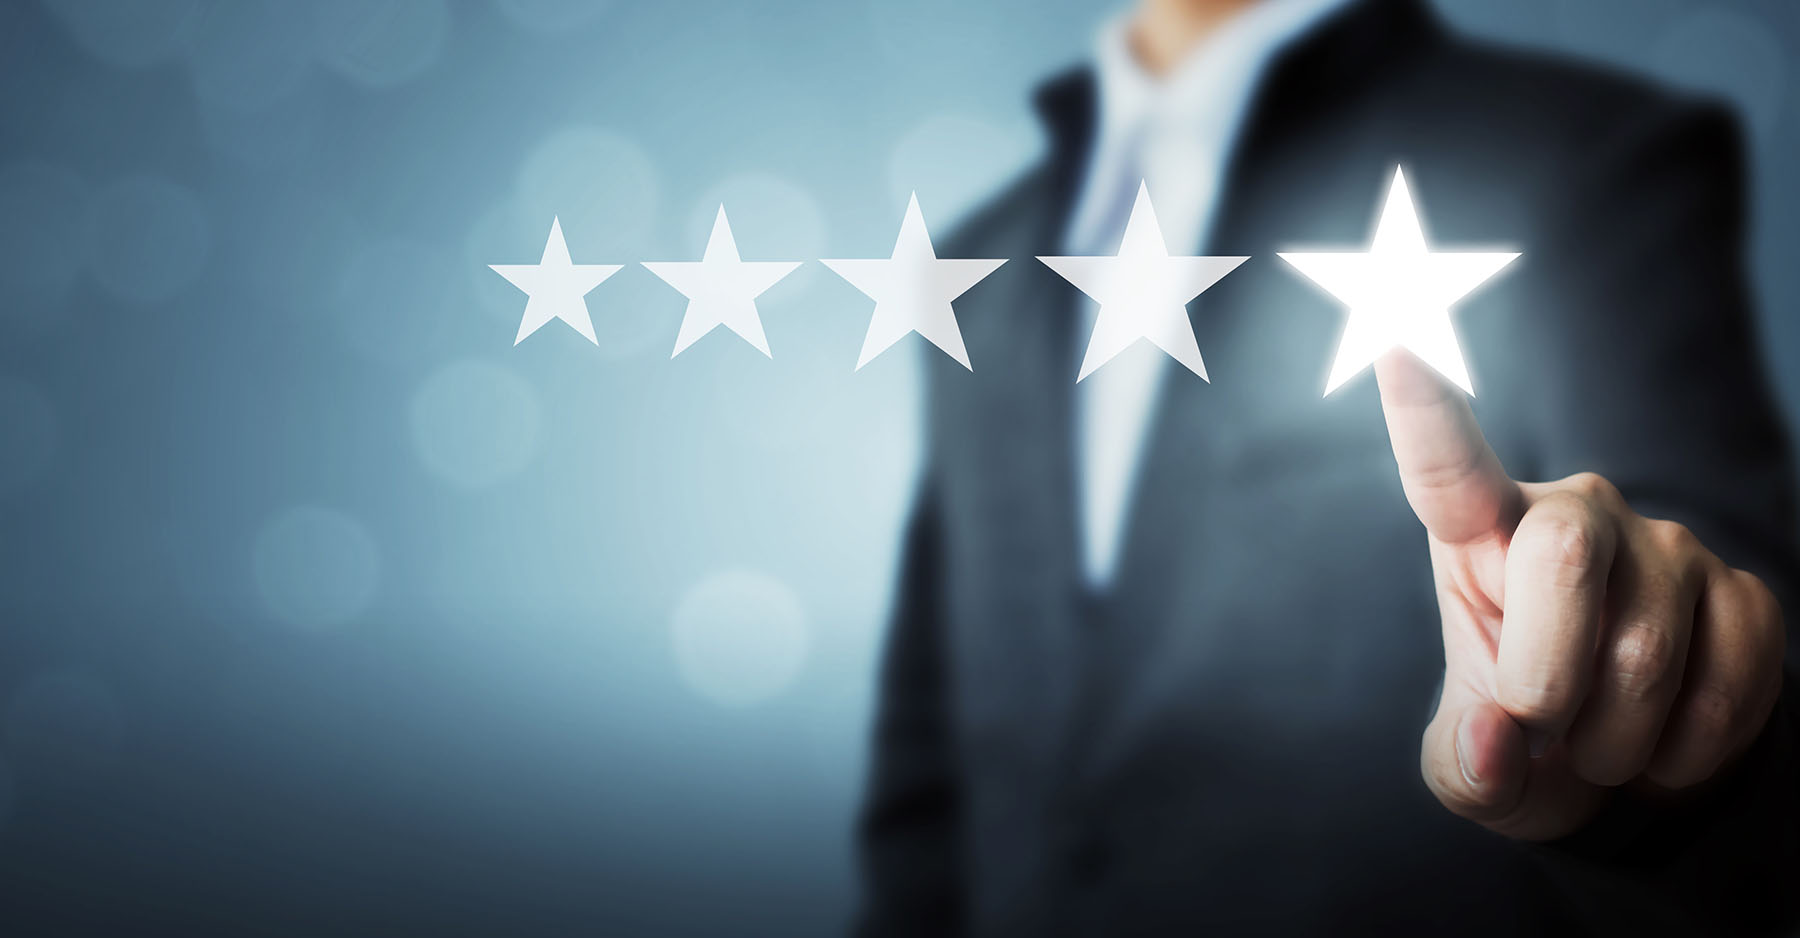 Workforce Management and CMS Star Ratings in Long-Term Care